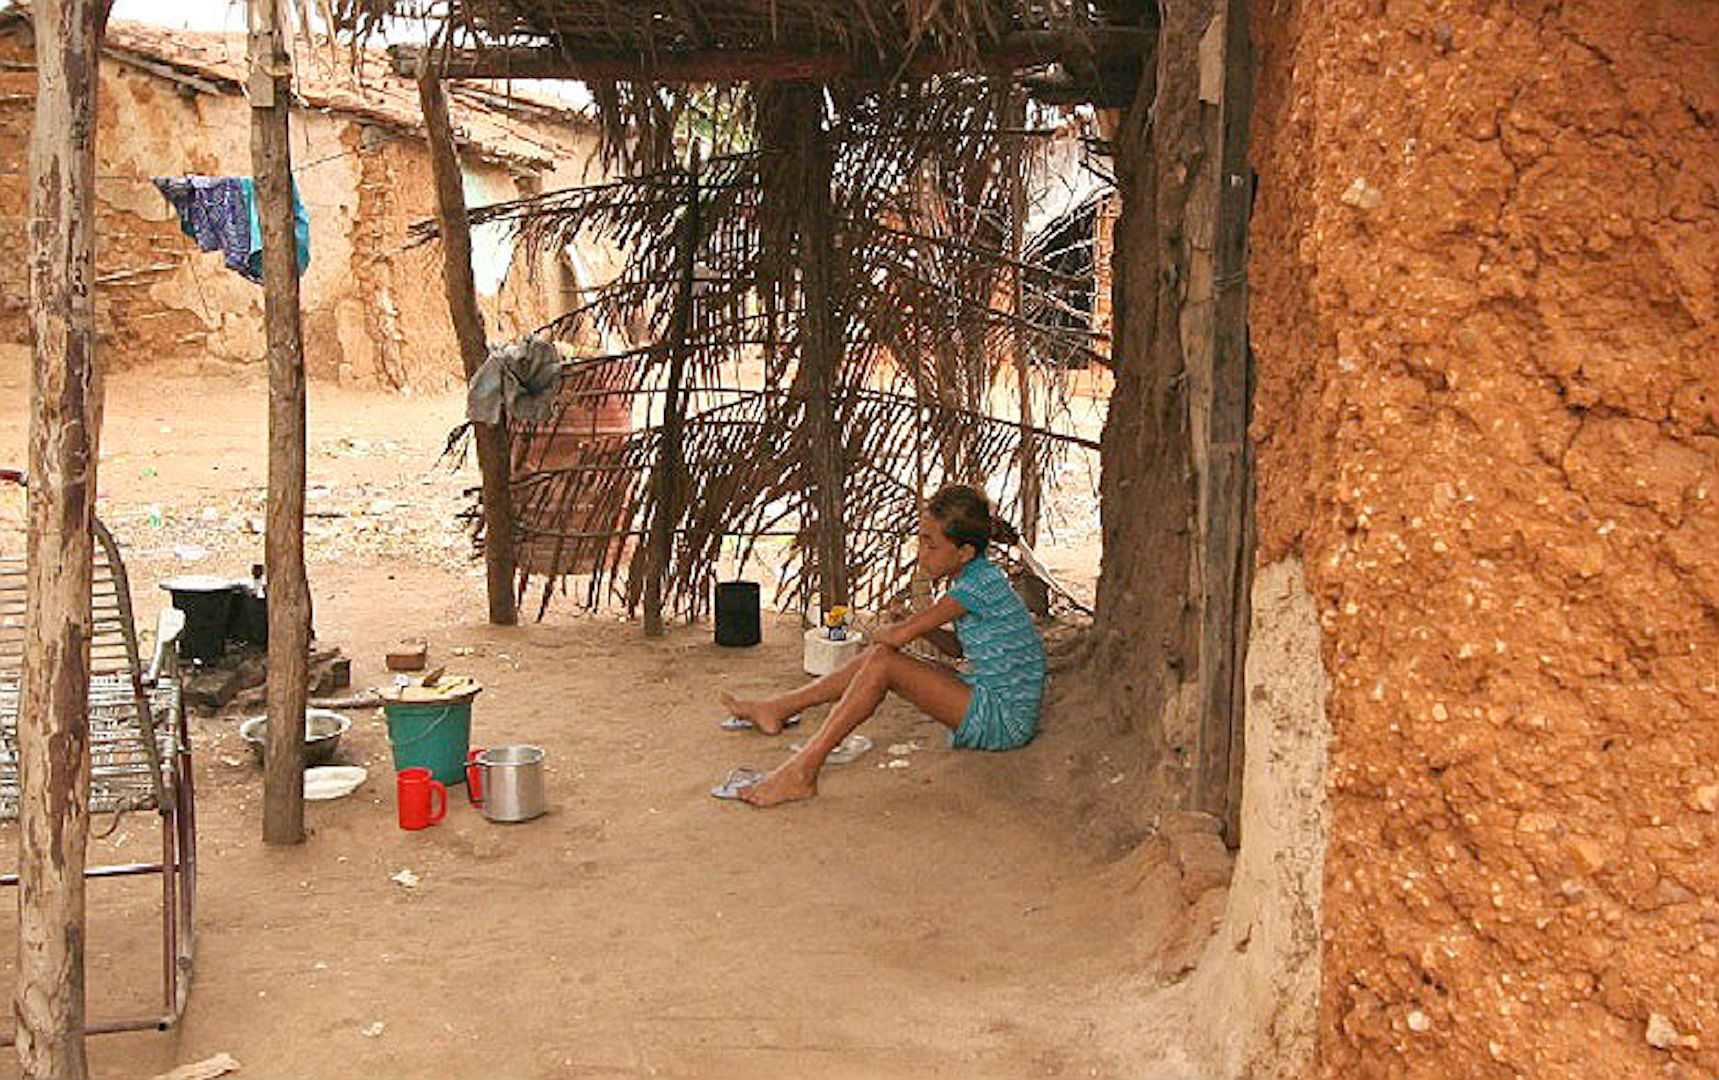 Brazil,The Northeast of Brazil is one of the poorest regions of the country,